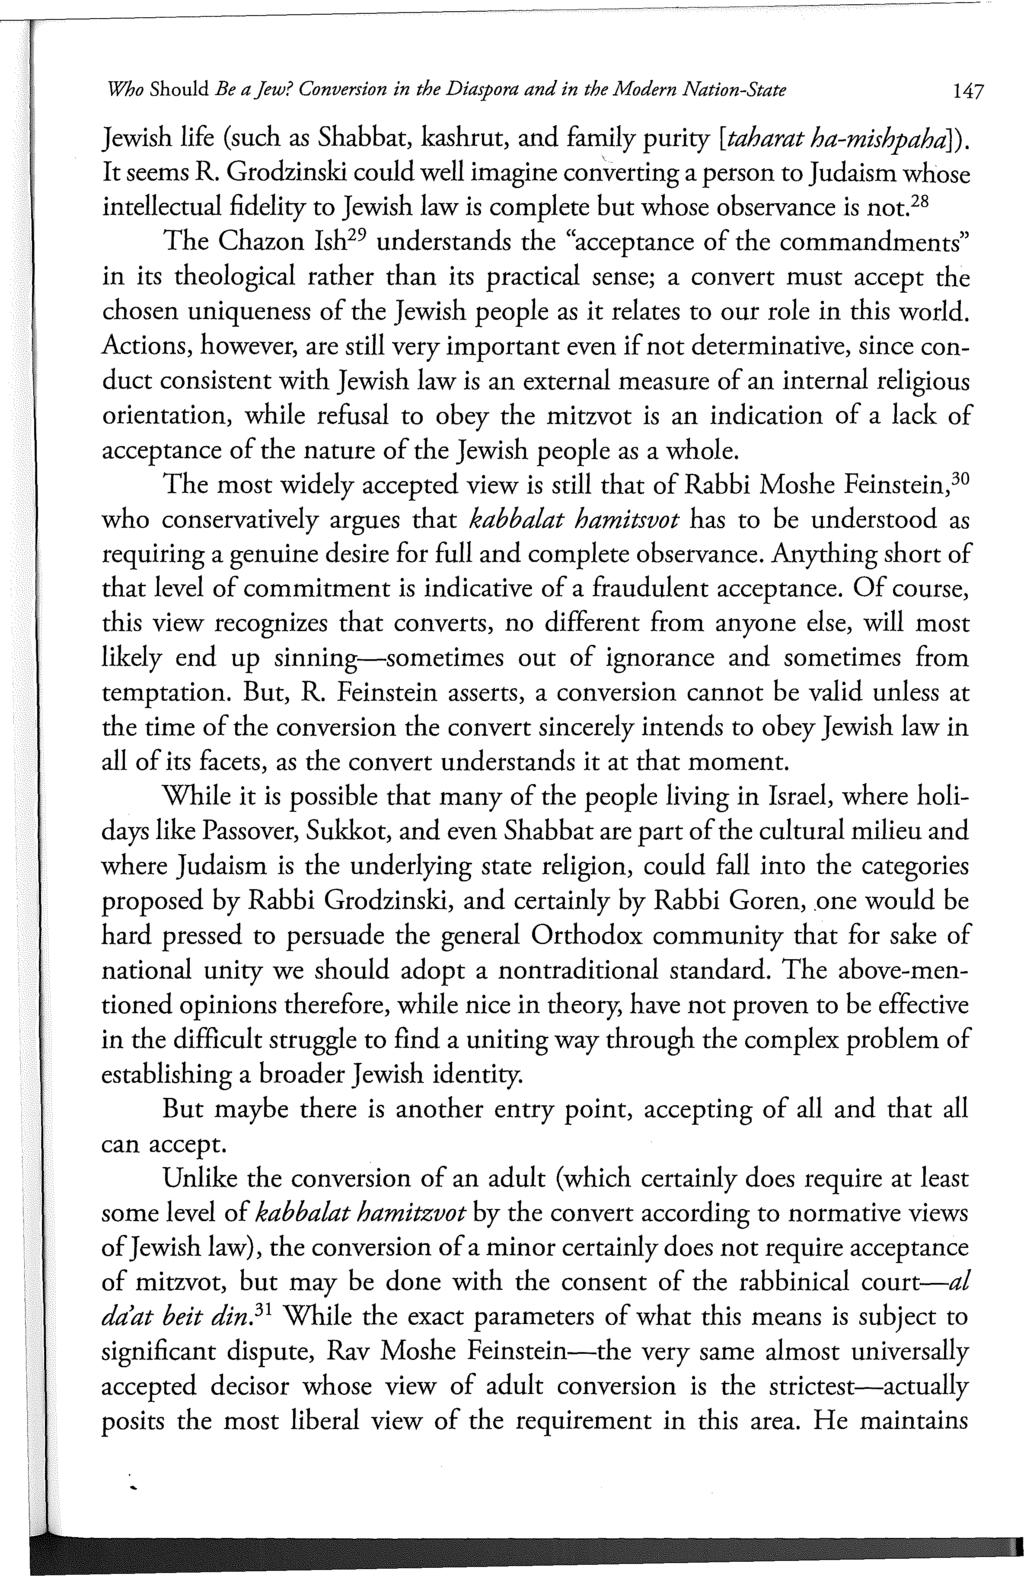 Who Should Be a Jew? Conversion in the Diaspora and in the Modern Nation-State 147 Jewish life (such as Shabbat, kashrut, and family purity [taharat ha-mishpaha]). It seems R.